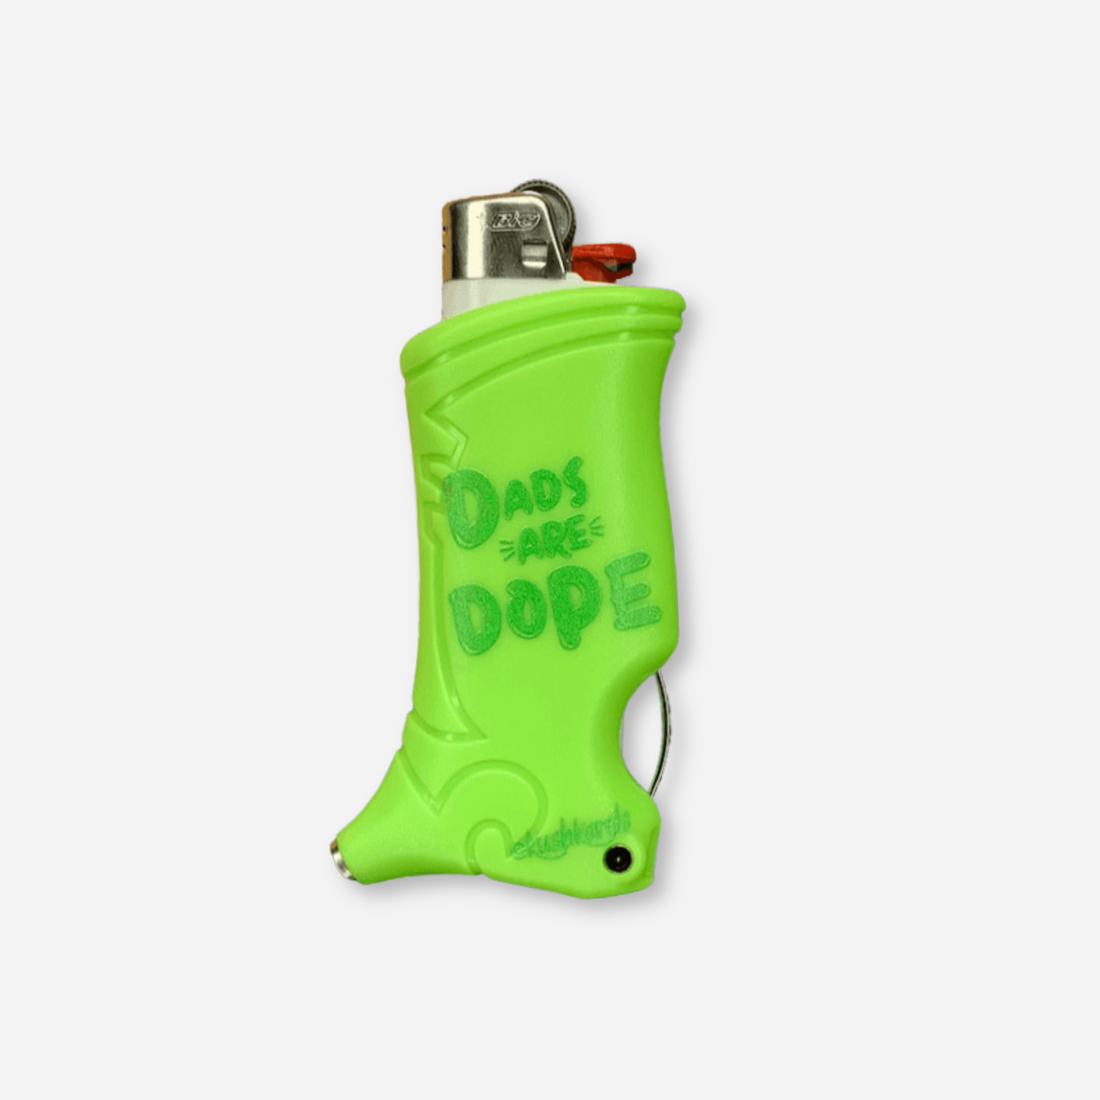 Dope Dad Toker Poker Lighter Case in vibrant green with the message &quot;Dads Are Dope,&quot; featuring a built-in poker and tamper.